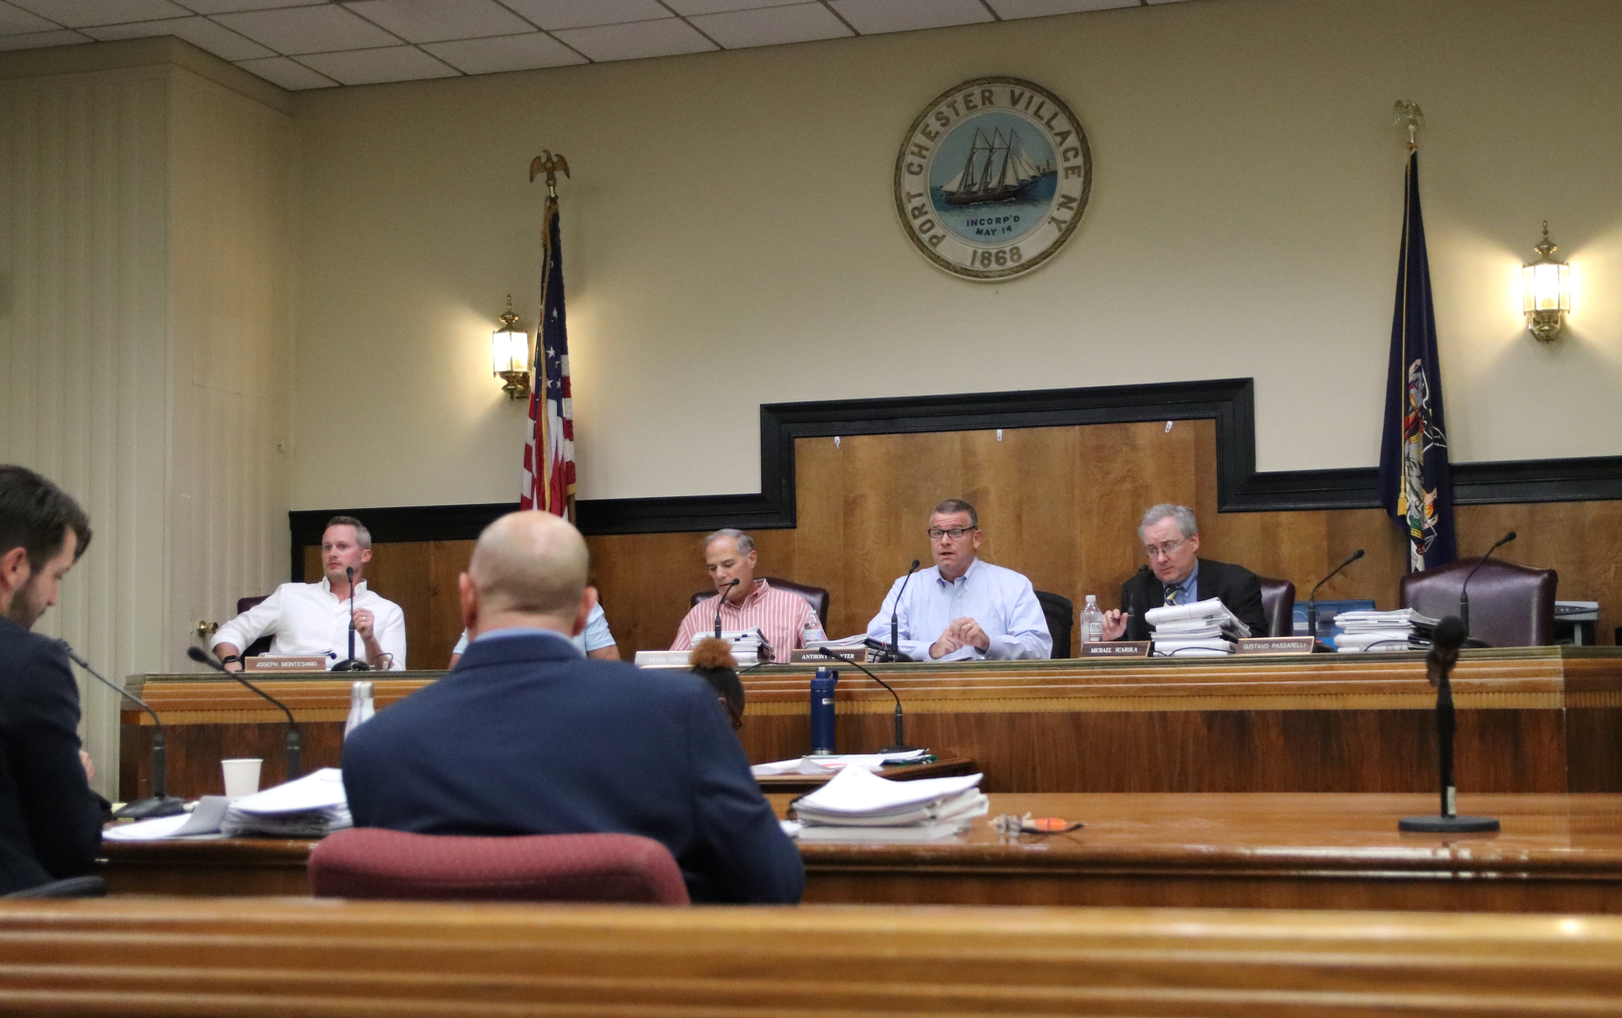 The Port Chester Planning Commission includes Joseph Montesano, Michael Scarola, Christopher Summa, Peter Coperine and Anthony Baxter. Sept 30, 2019. Photo: Leslie Yager